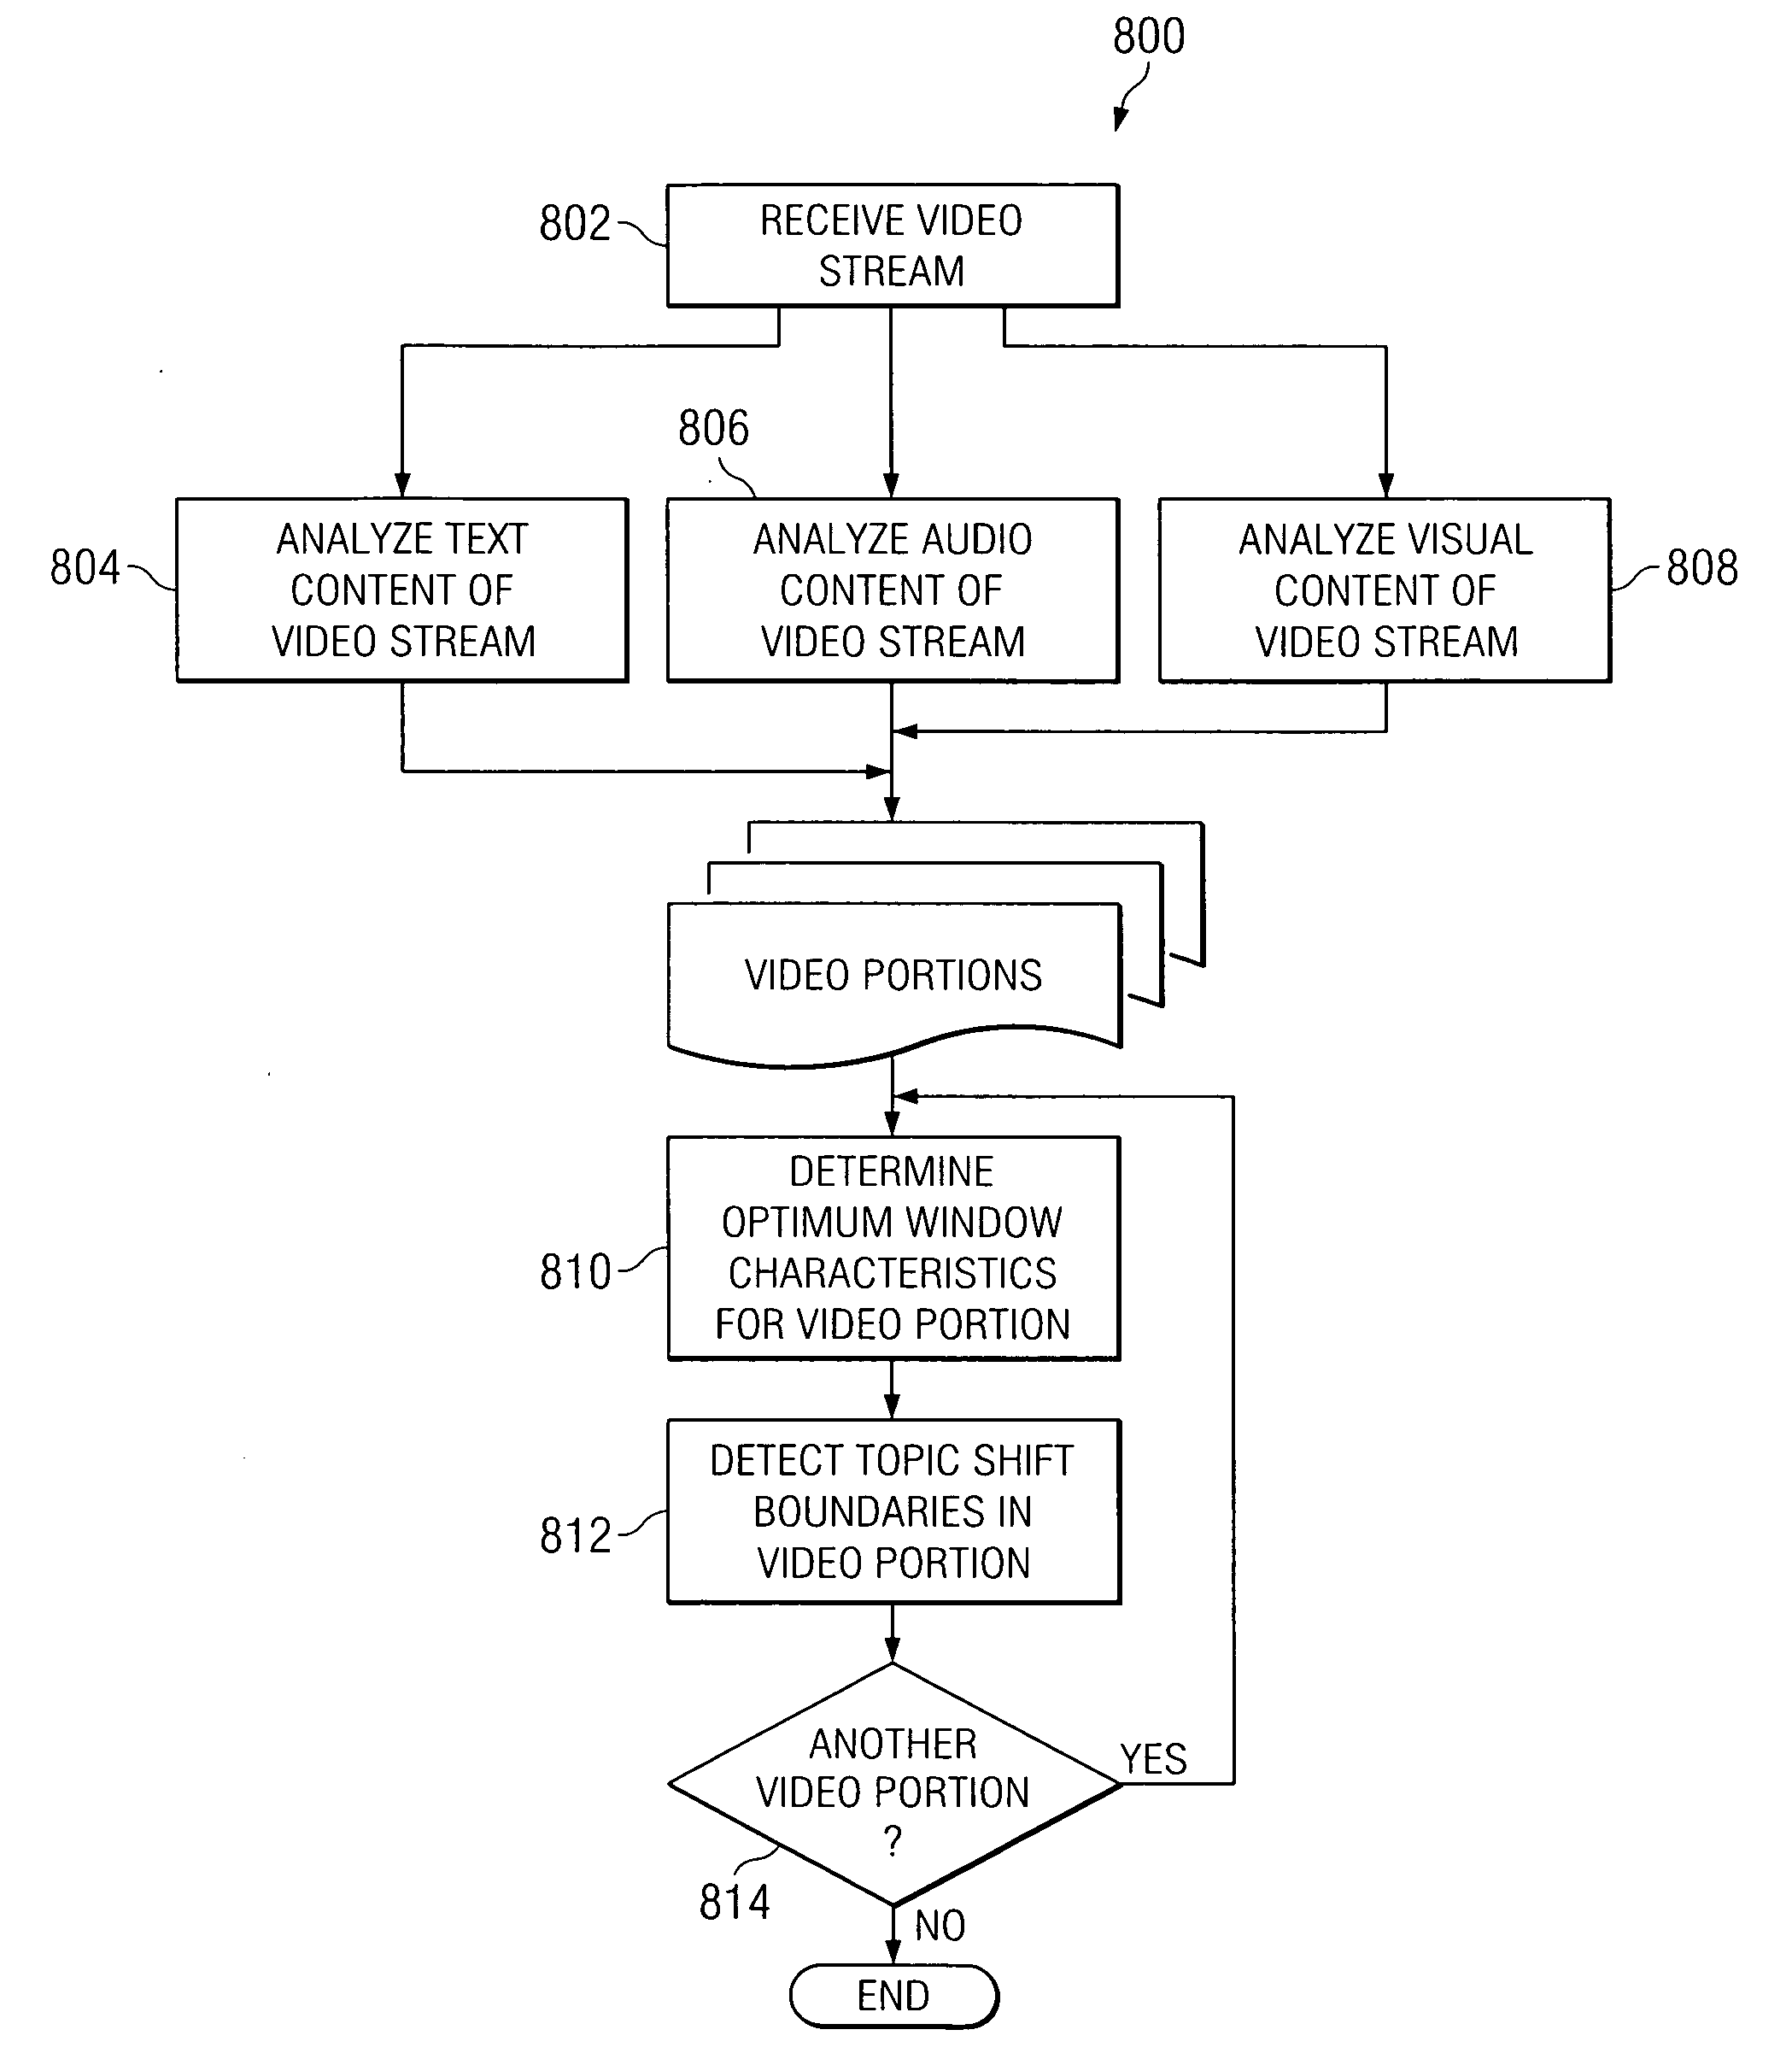 System and method for detecting topic shift boundaries in multimedia streams using joint audio, visual and text cues